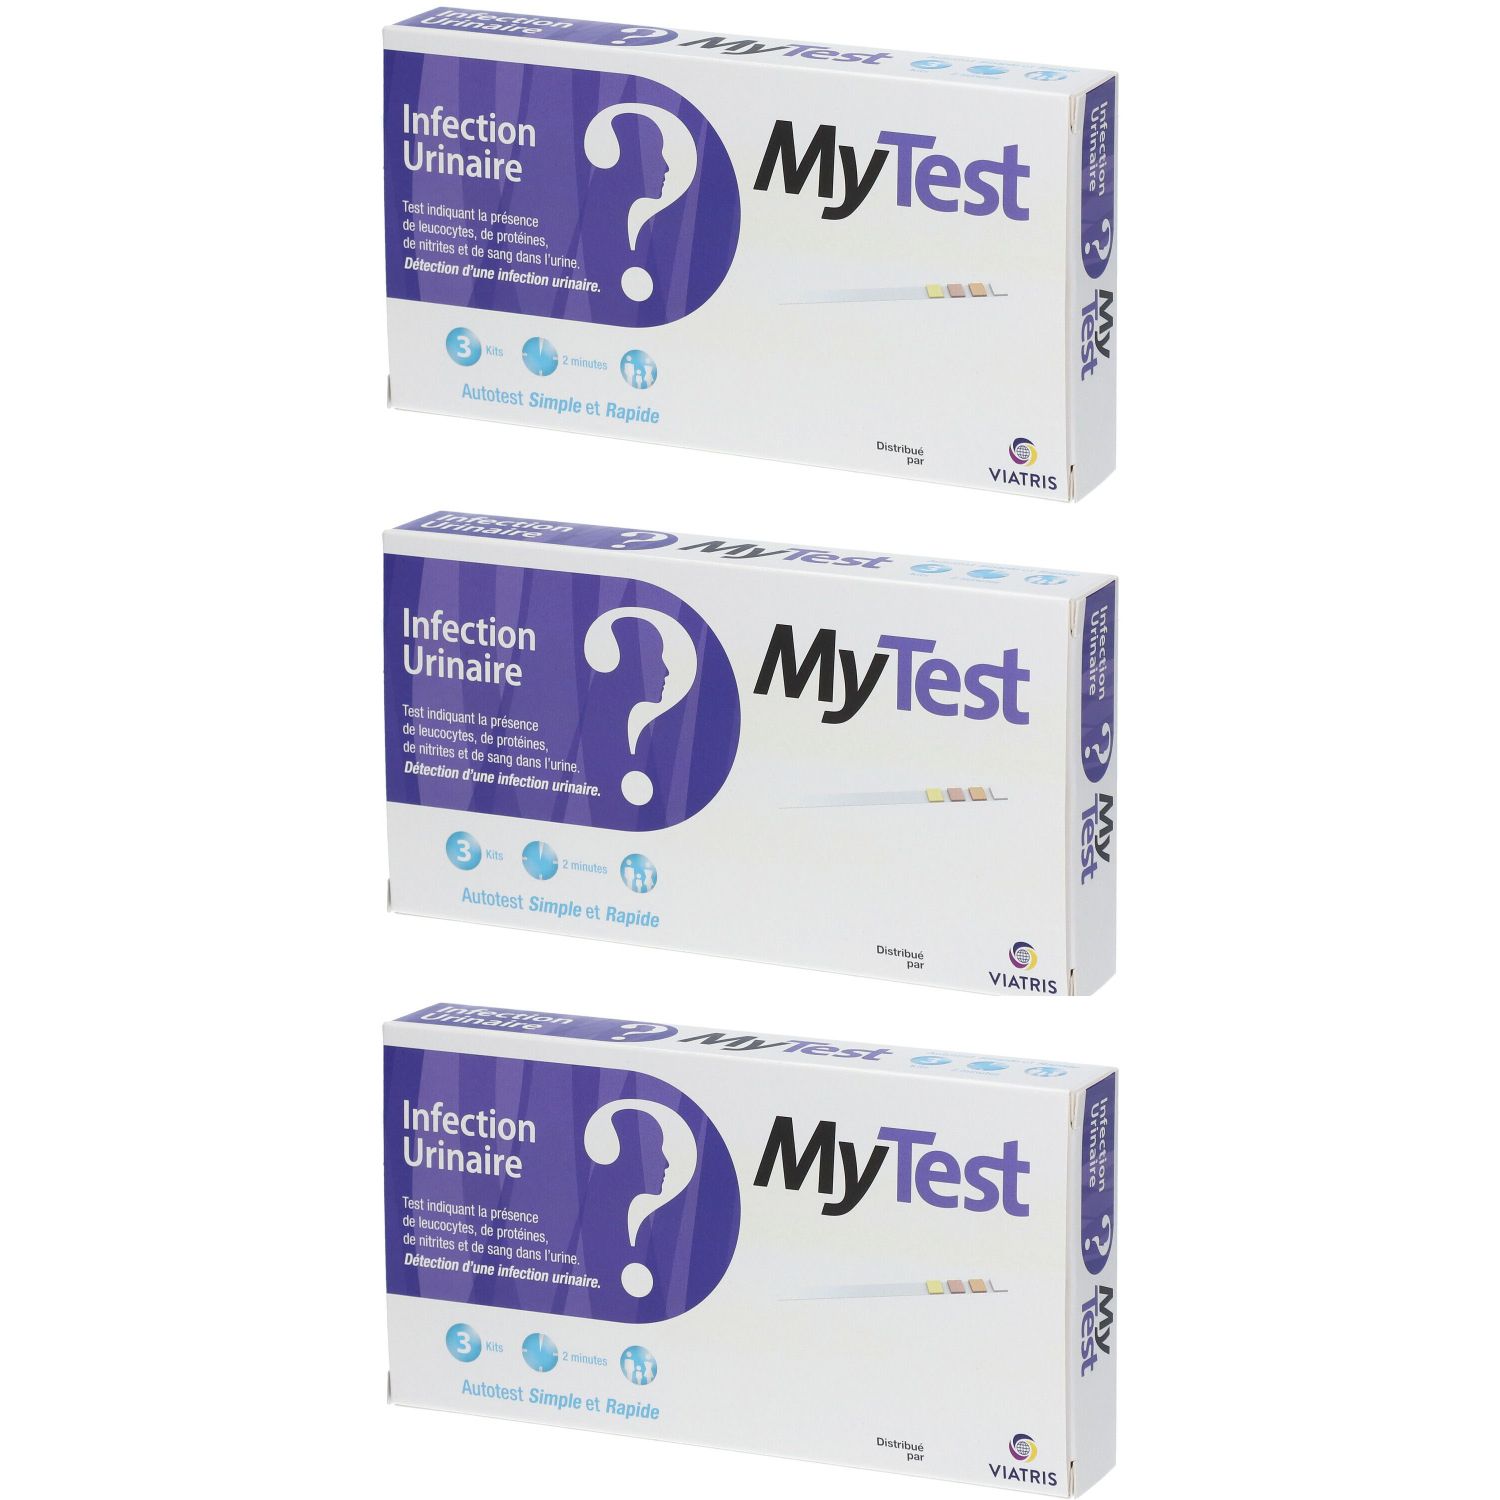 My Test infection urinaire détection infection urinaire Mylan - 3 kits